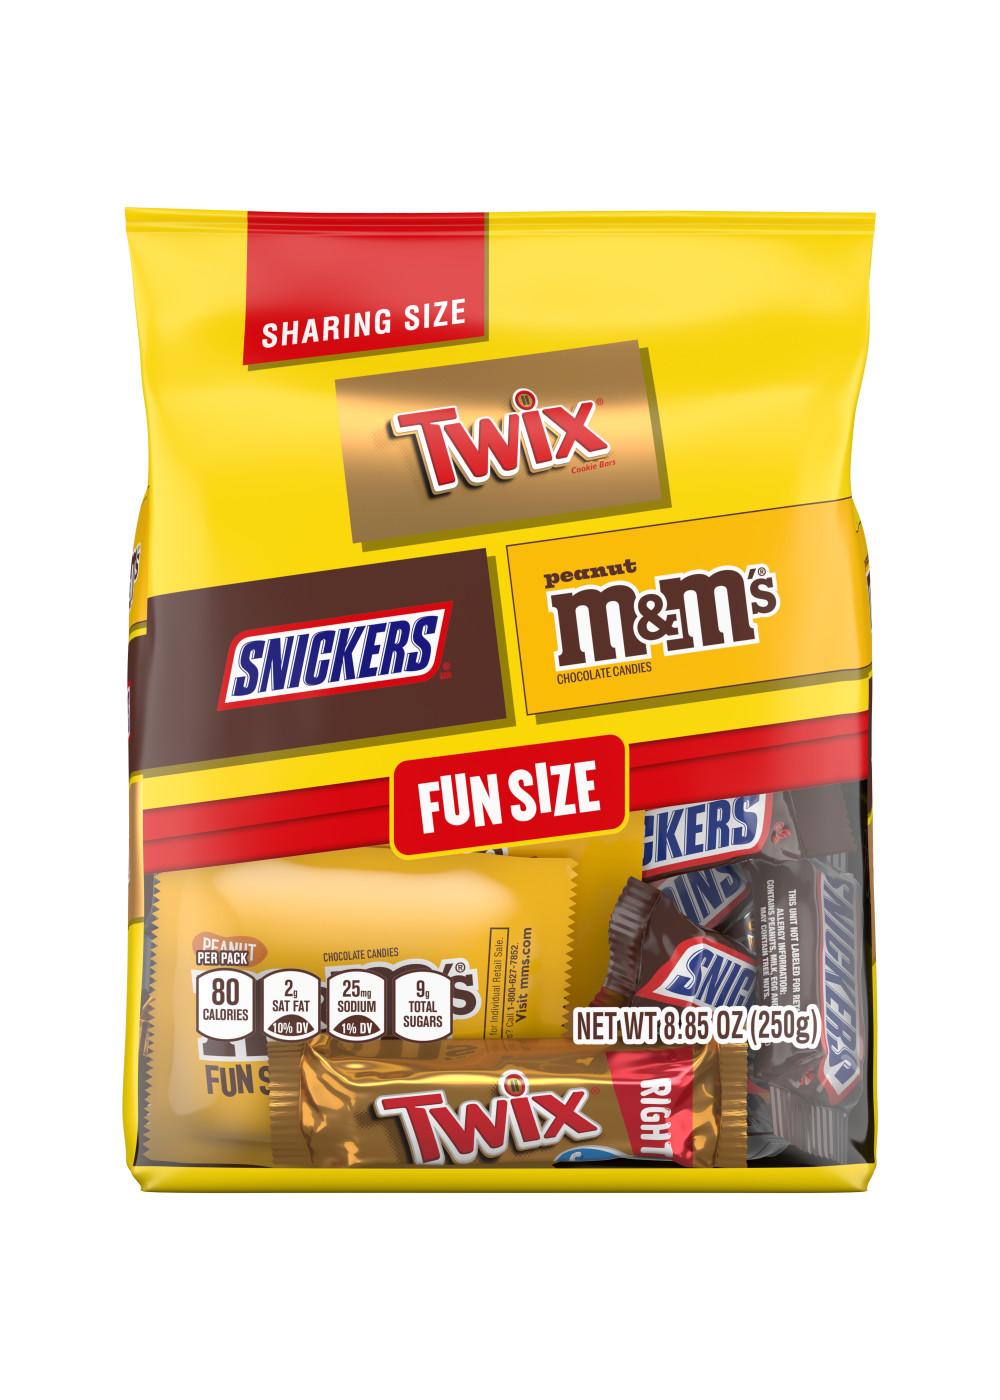 M&M'S, Snickers, & Twix Assorted Fun Size Chocolate Candy - Sharing Size; image 1 of 7